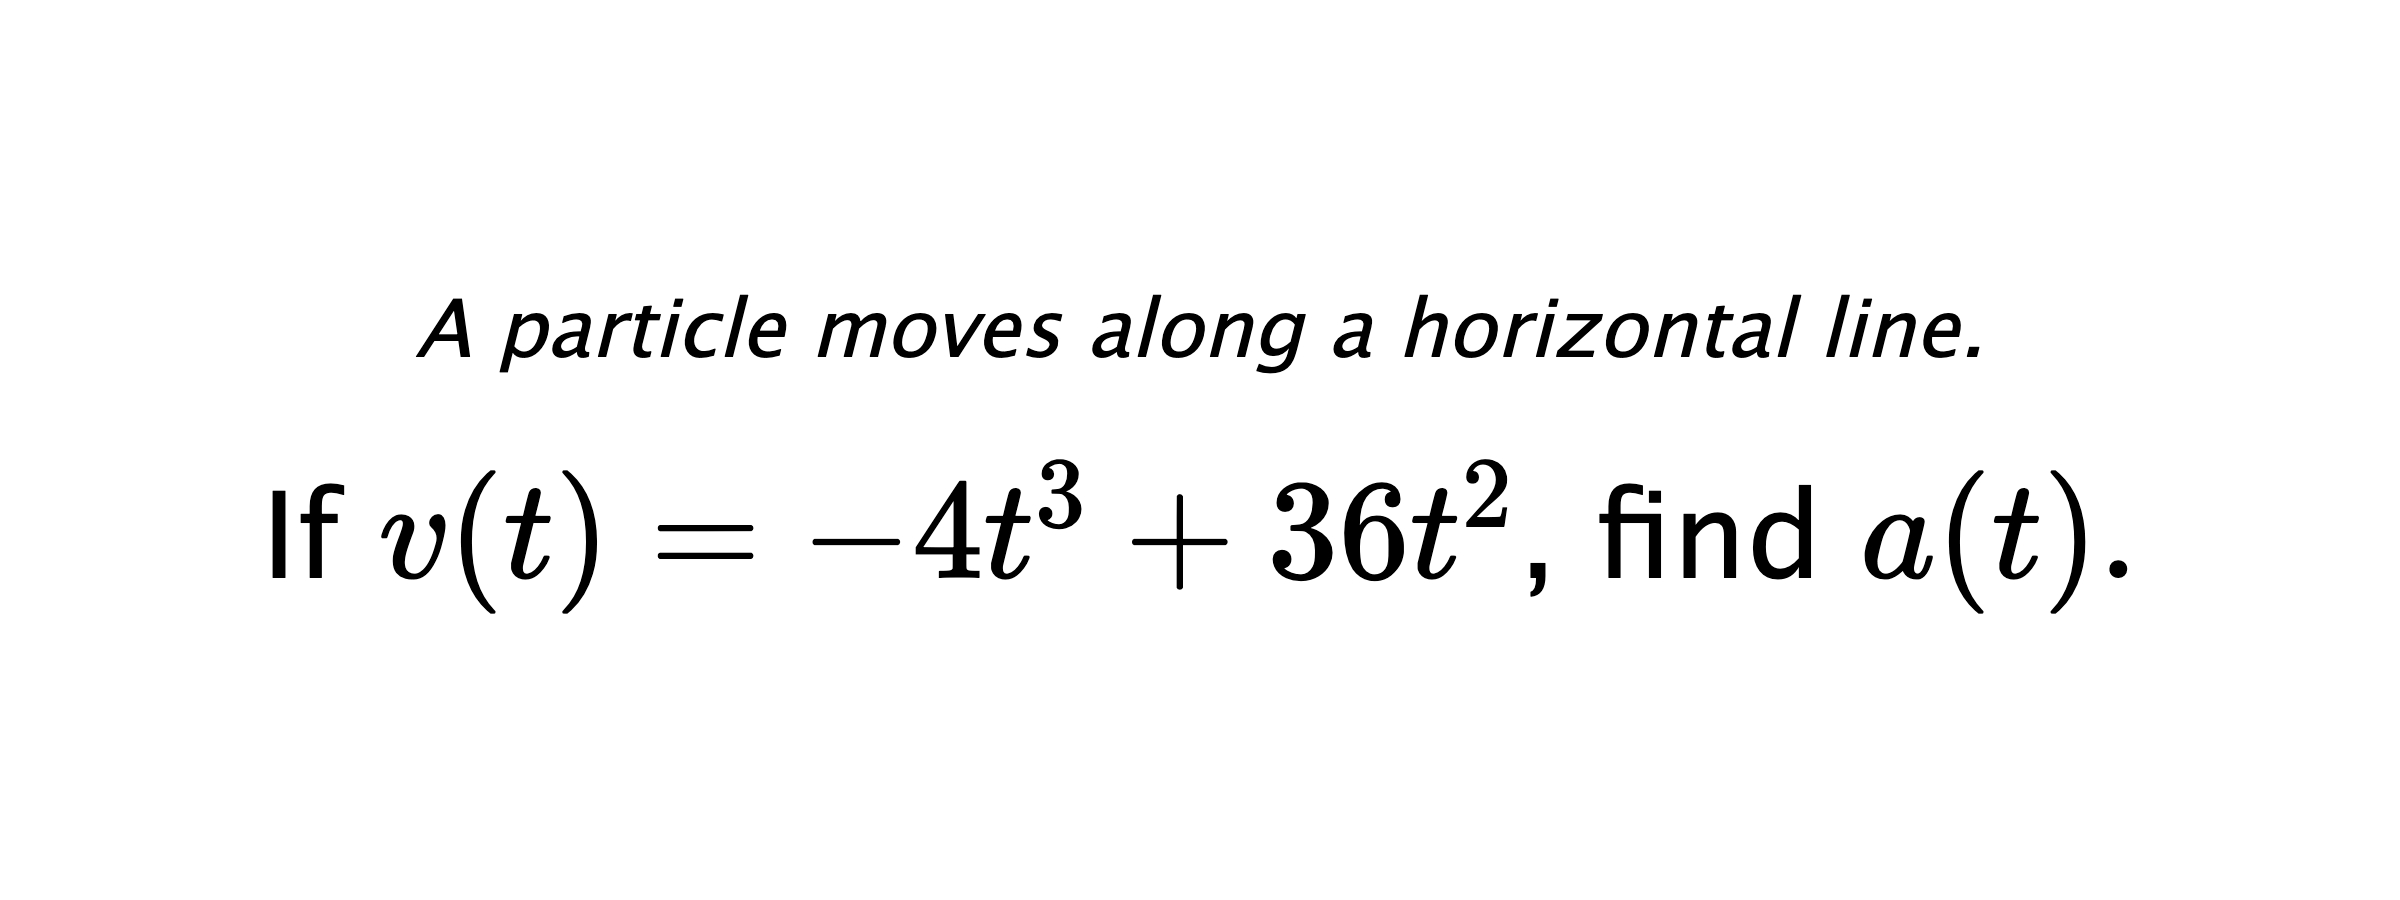 A particle moves along a horizontal line. If $ v(t)=-4t^3+36t^2 $, find $ a(t). $